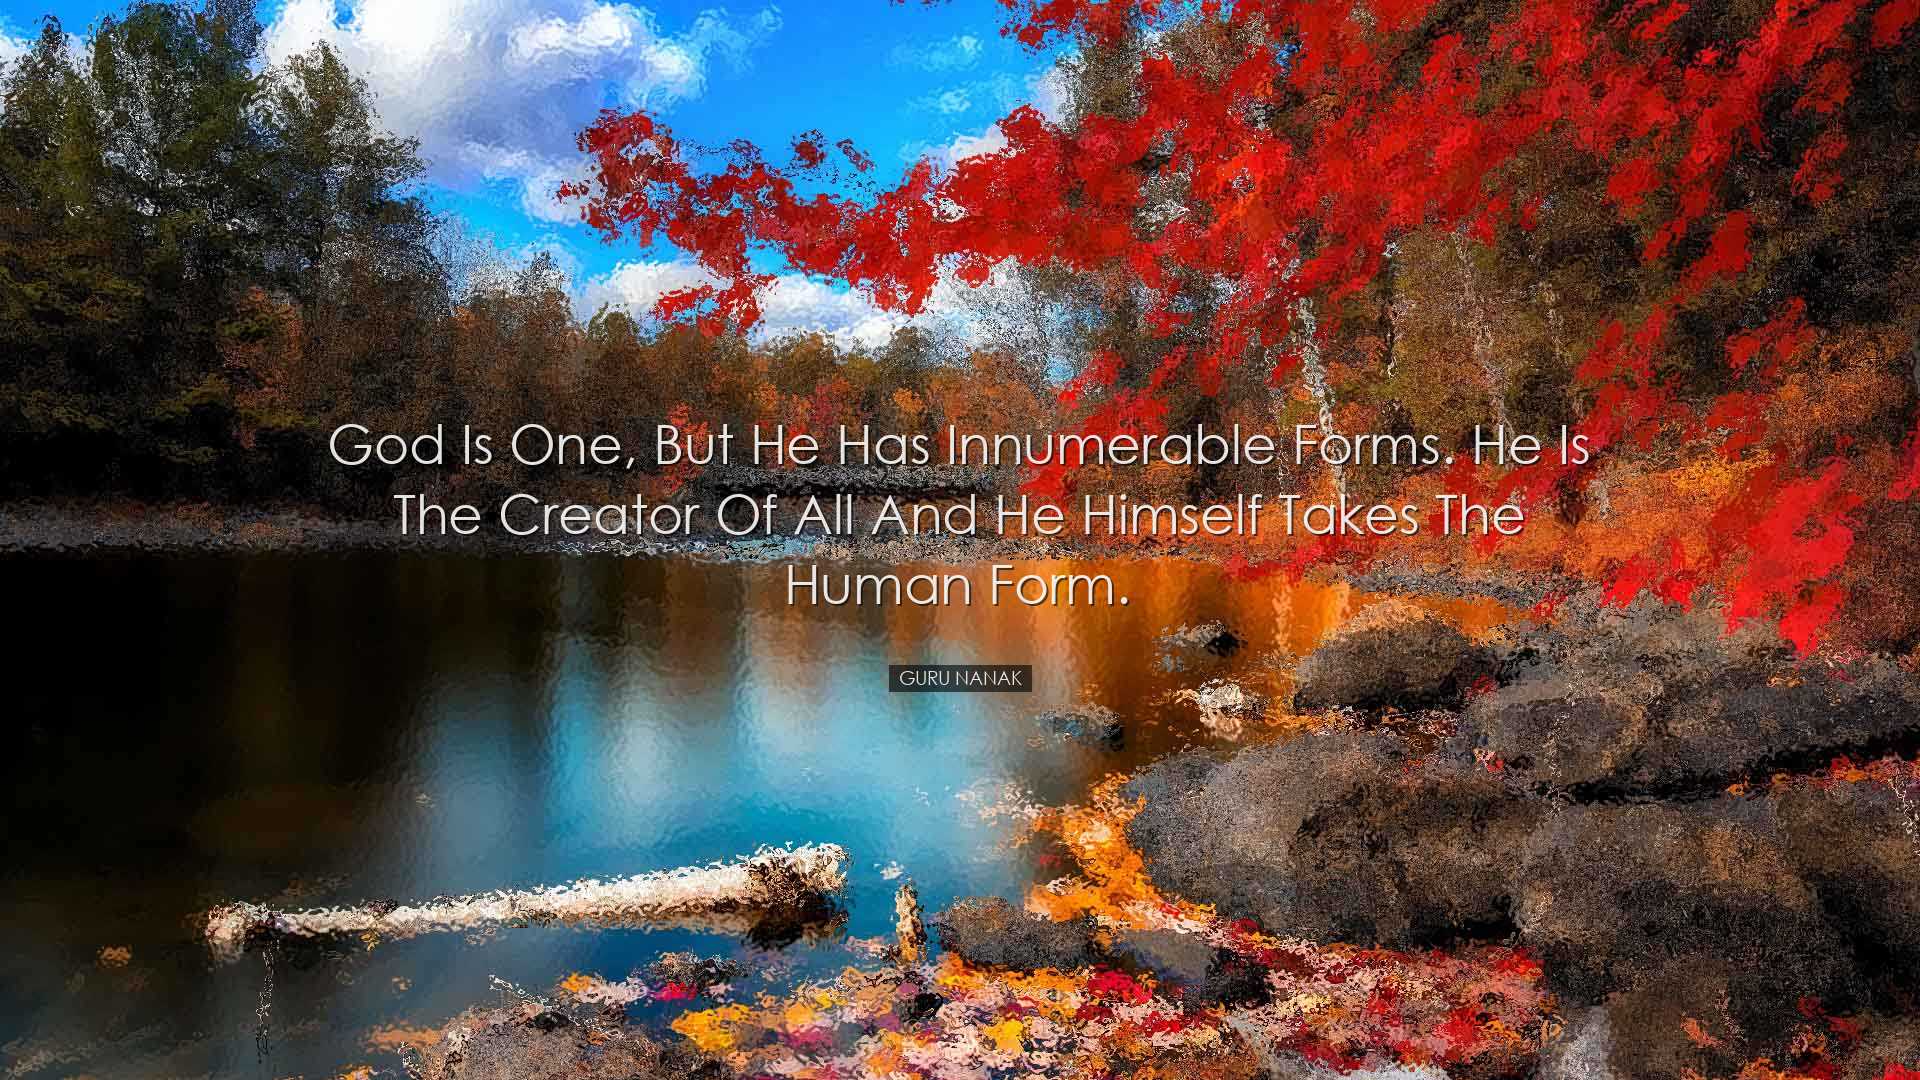 God is one, but he has innumerable forms. He is the creator of all